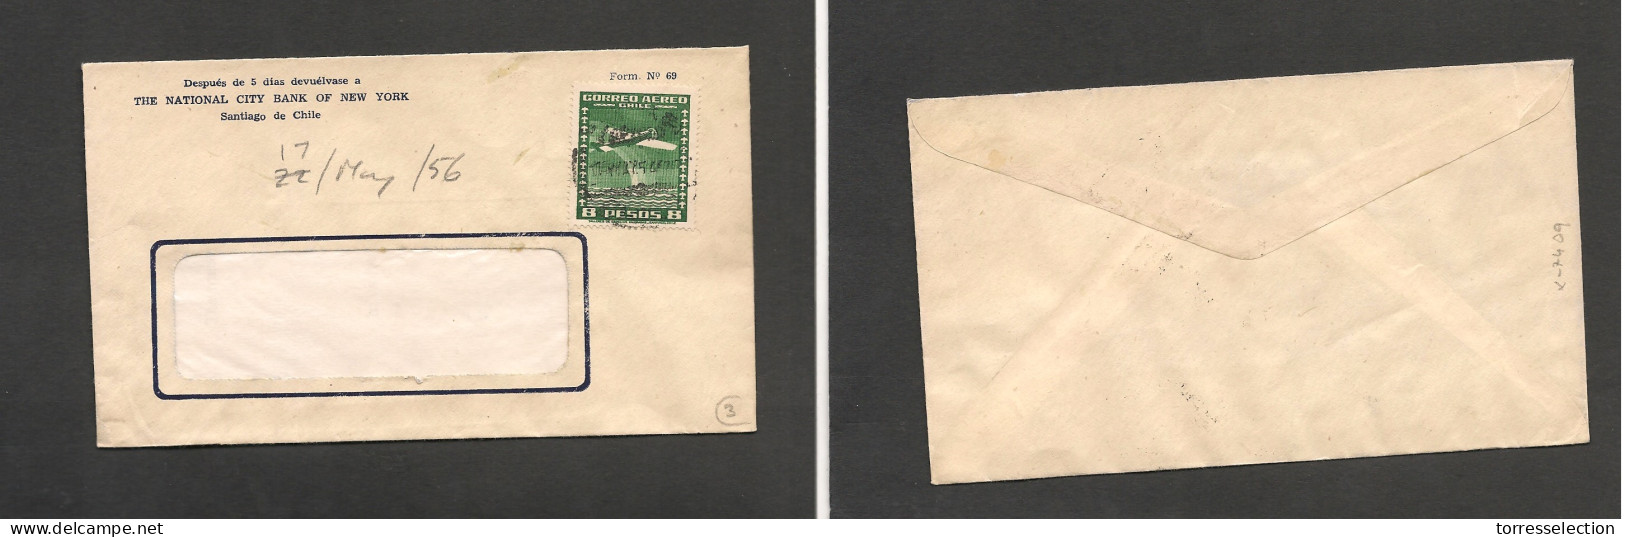 CHILE. Chile - Cover - 1956 17 May Stgo To USA? Fkd Env Air 8 Pesos Rate. Ex-Prof West UK Airmails Coll.- . Easy Deal. - Cile